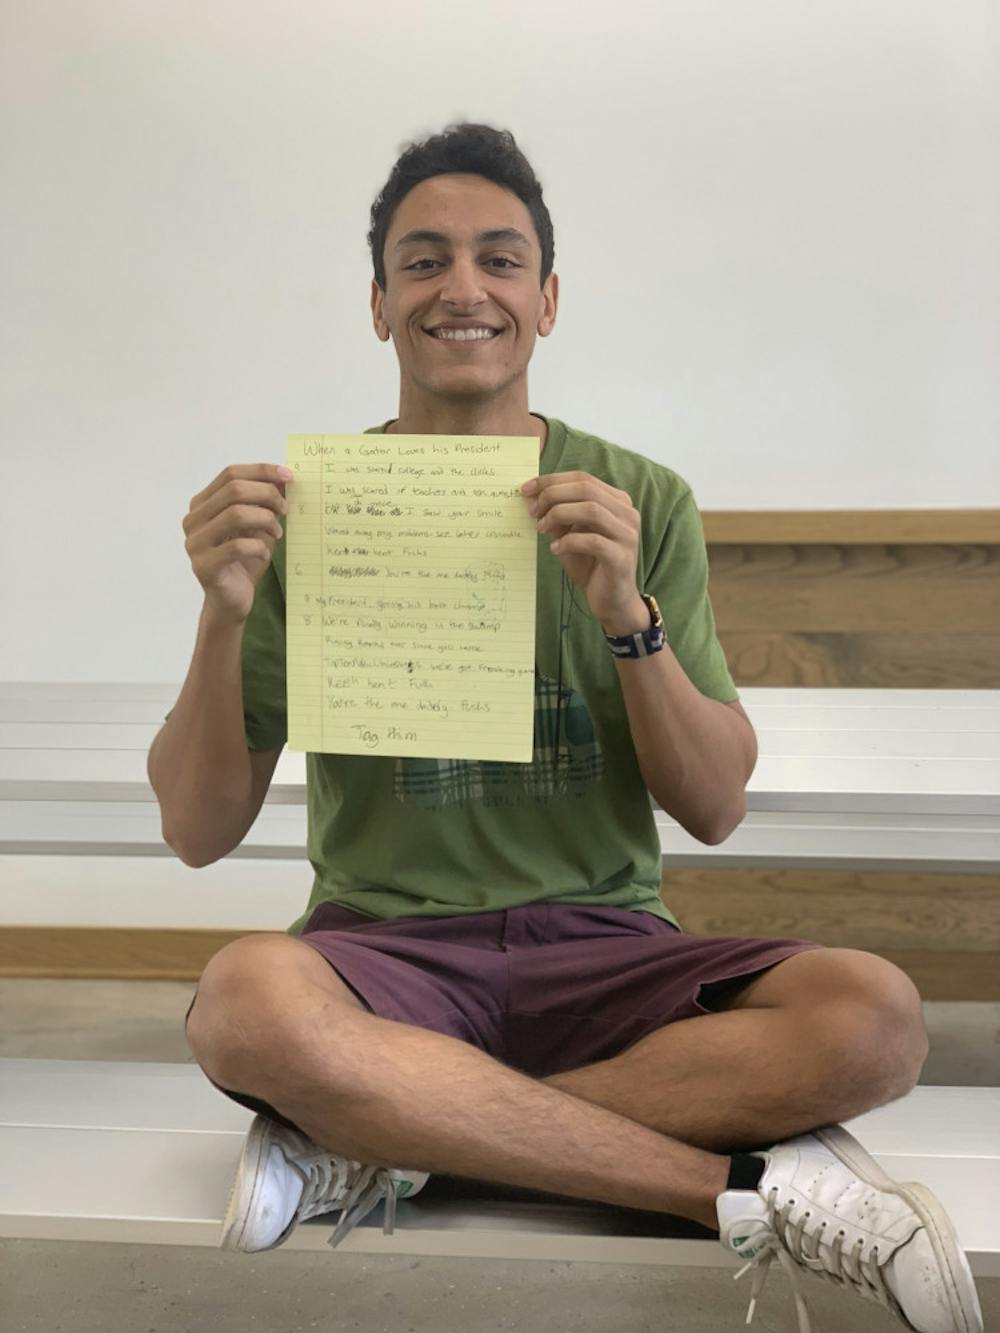 <p><span id="docs-internal-guid-c2baf636-7fff-9963-c34a-0c9554b03001"><span>Zakaria Bennouna, a 19-year-old UF mechanical engineering sophomore, holds the lyrics to his viral song “When a Gator Loves his President.” Lyrics include: “Kent Kent Fuchs, you’re the one, daddy Fuchs.”</span></span></p>